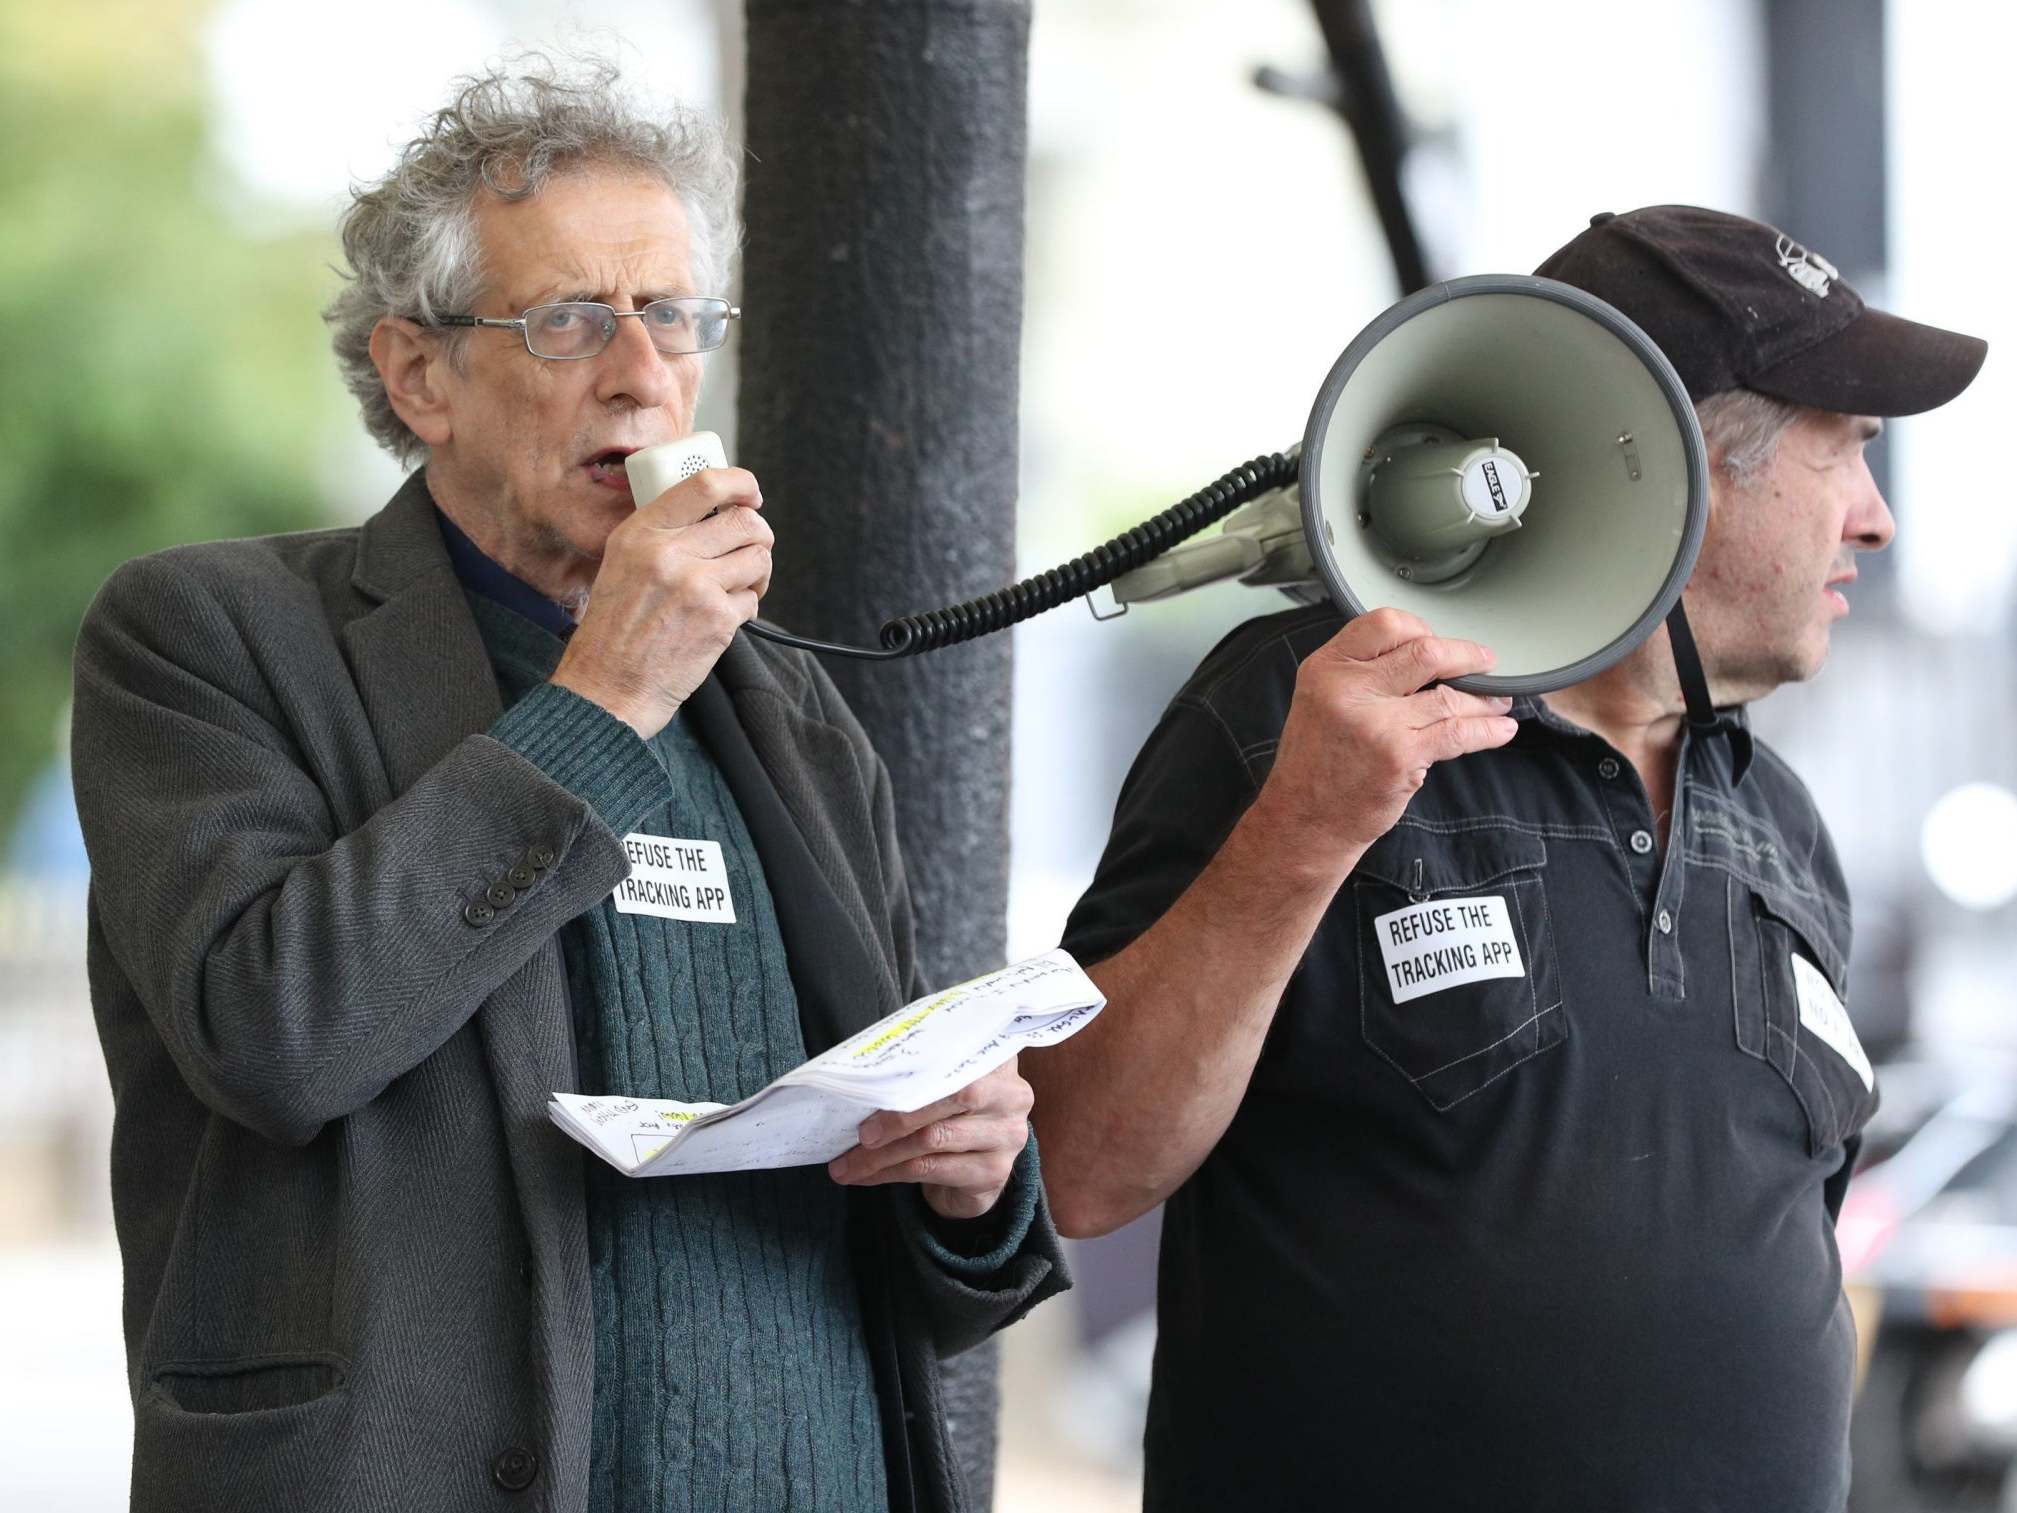 Piers Corbyn has attended numerous anti-lockdown protests